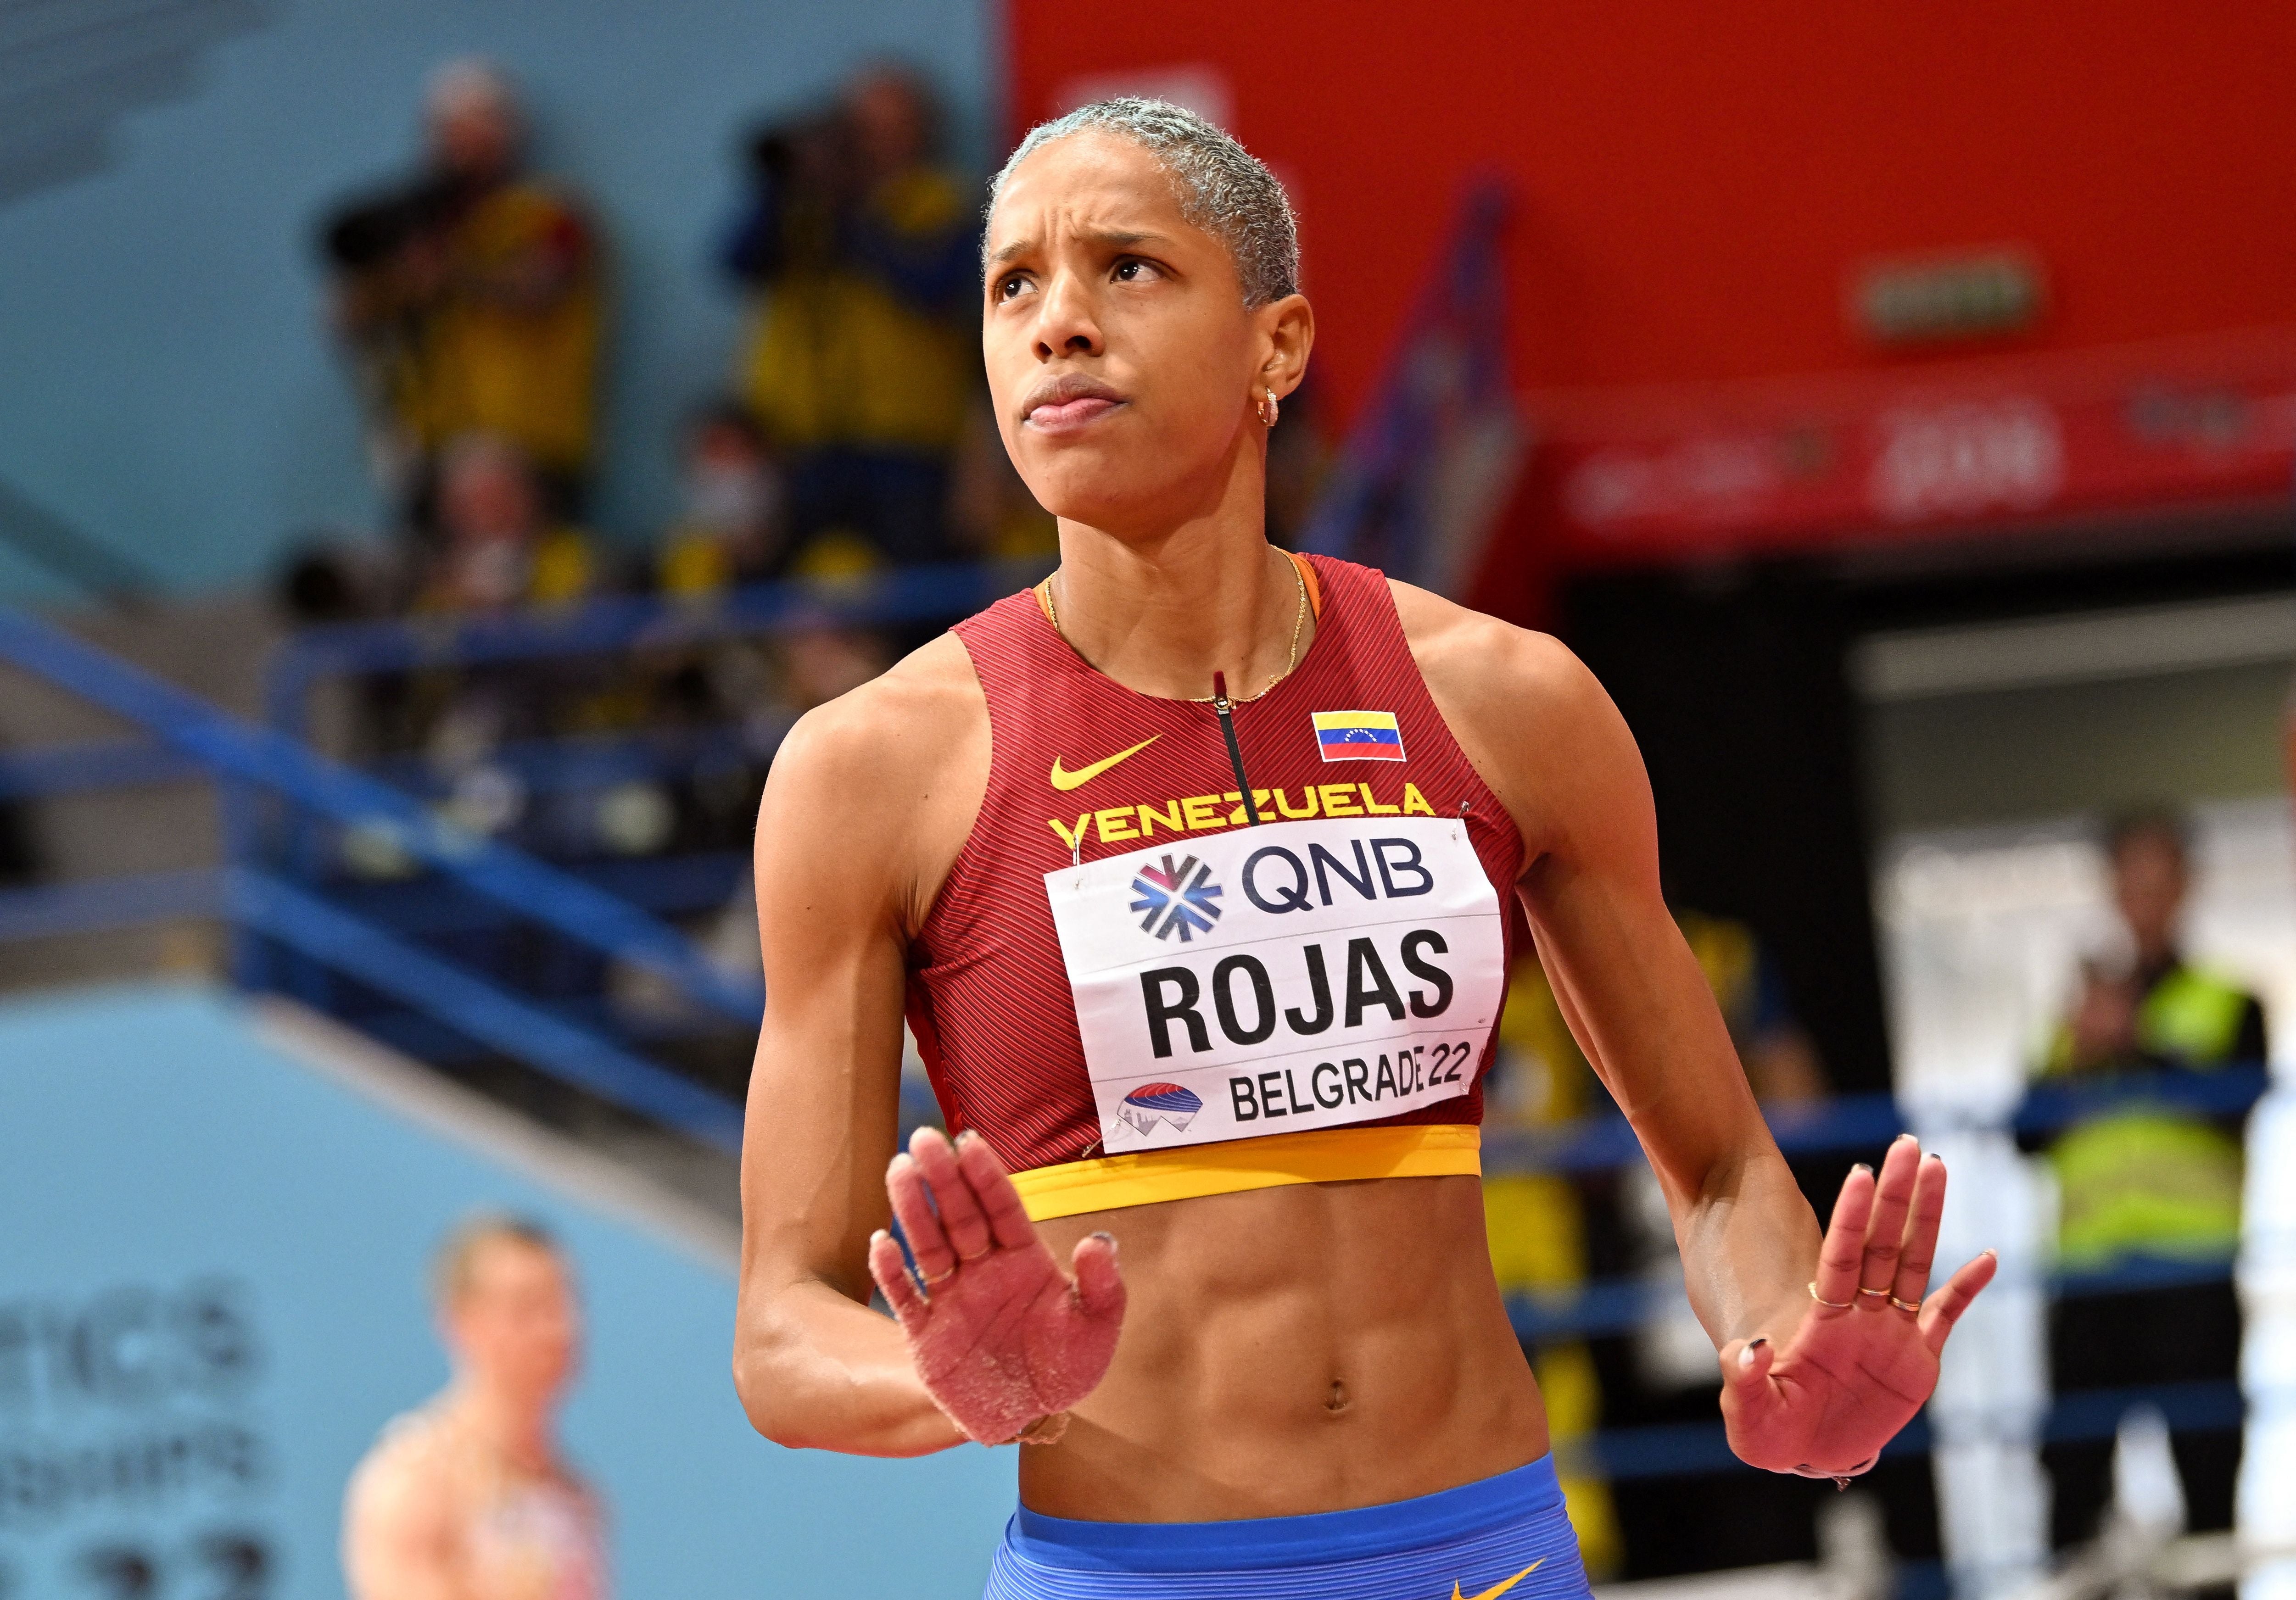 Rojas is the Olympic champion and world record holder in triple jump